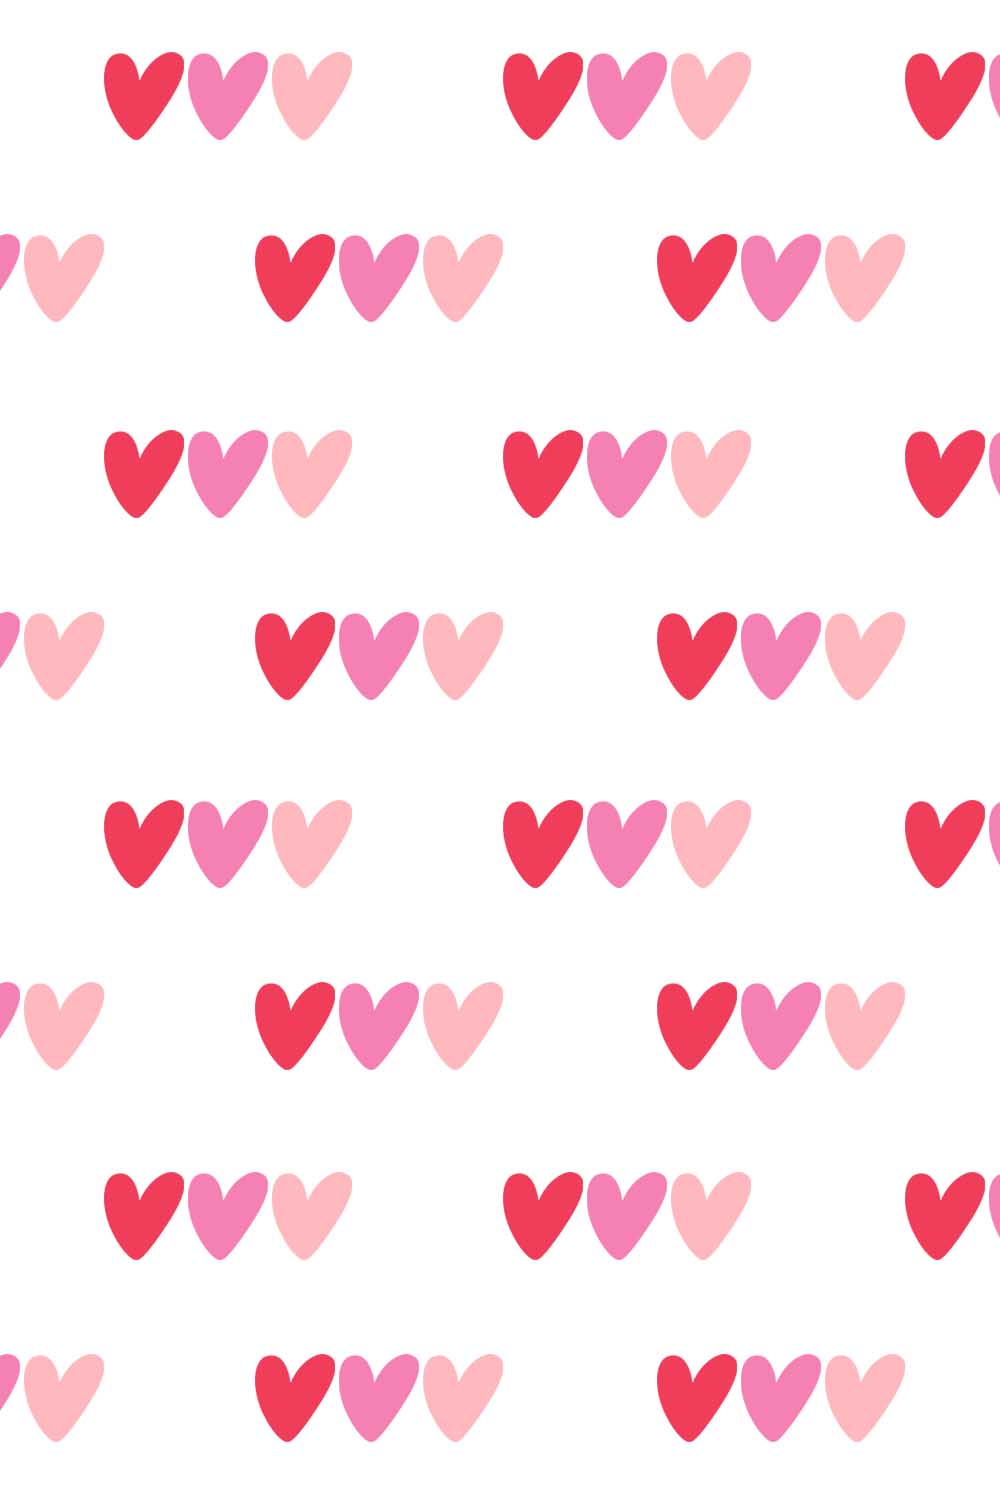 love pattern pinterest preview image.